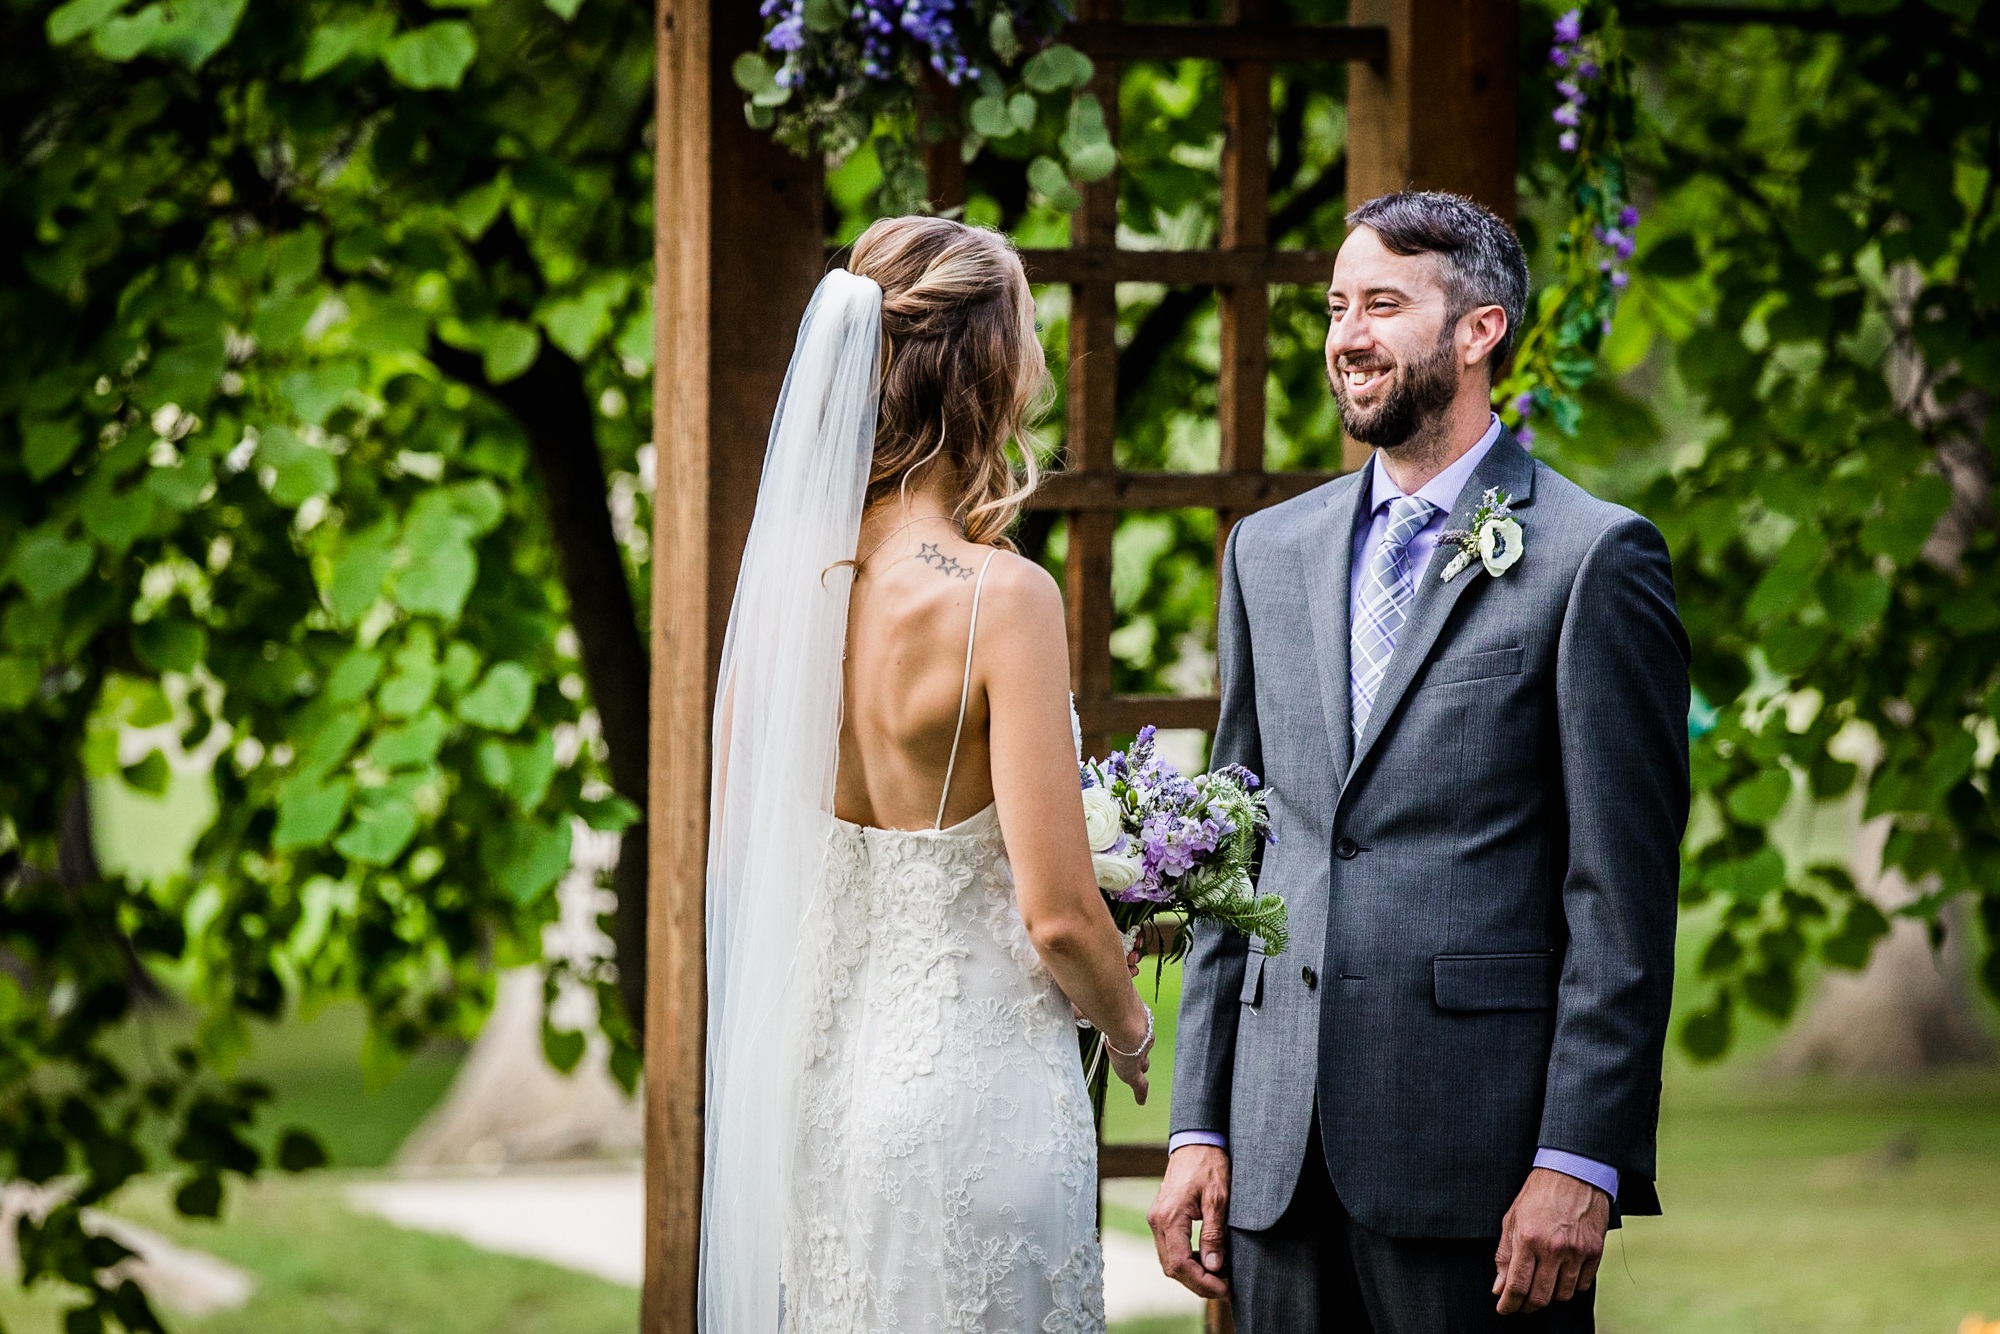 A groom laughs with his bride at a Katherine Legge Memorial lodge wedding ceremony